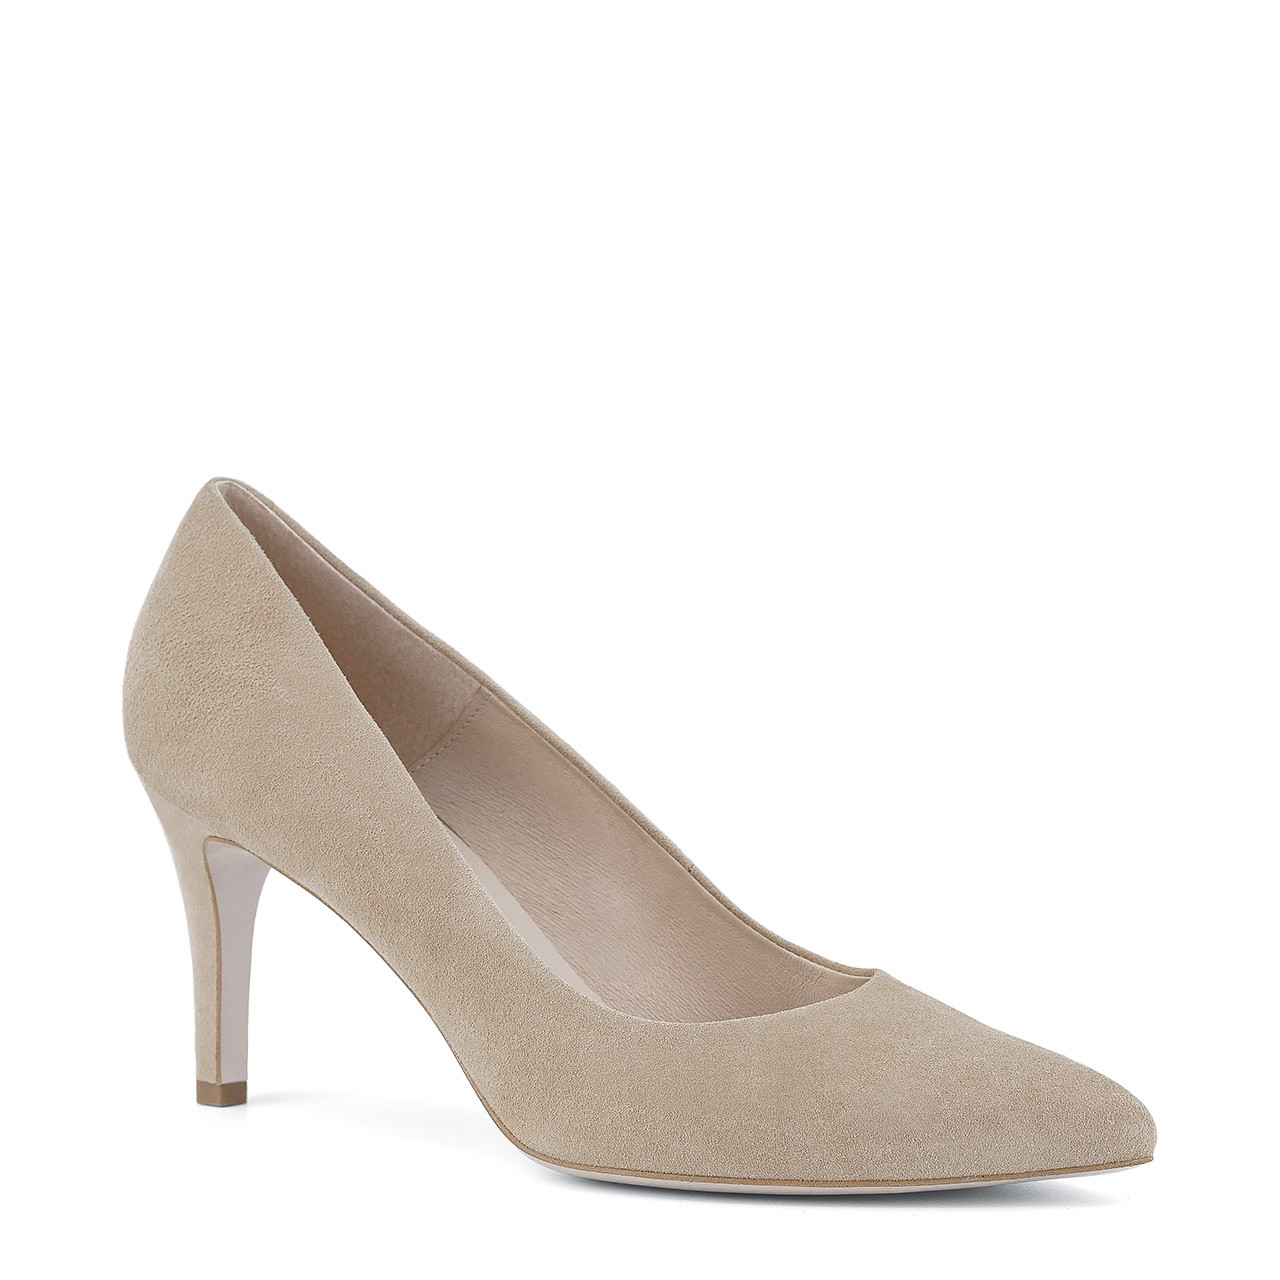 Beige suede pumps with a high heel and delicate pointed toes - BRAVOMODA